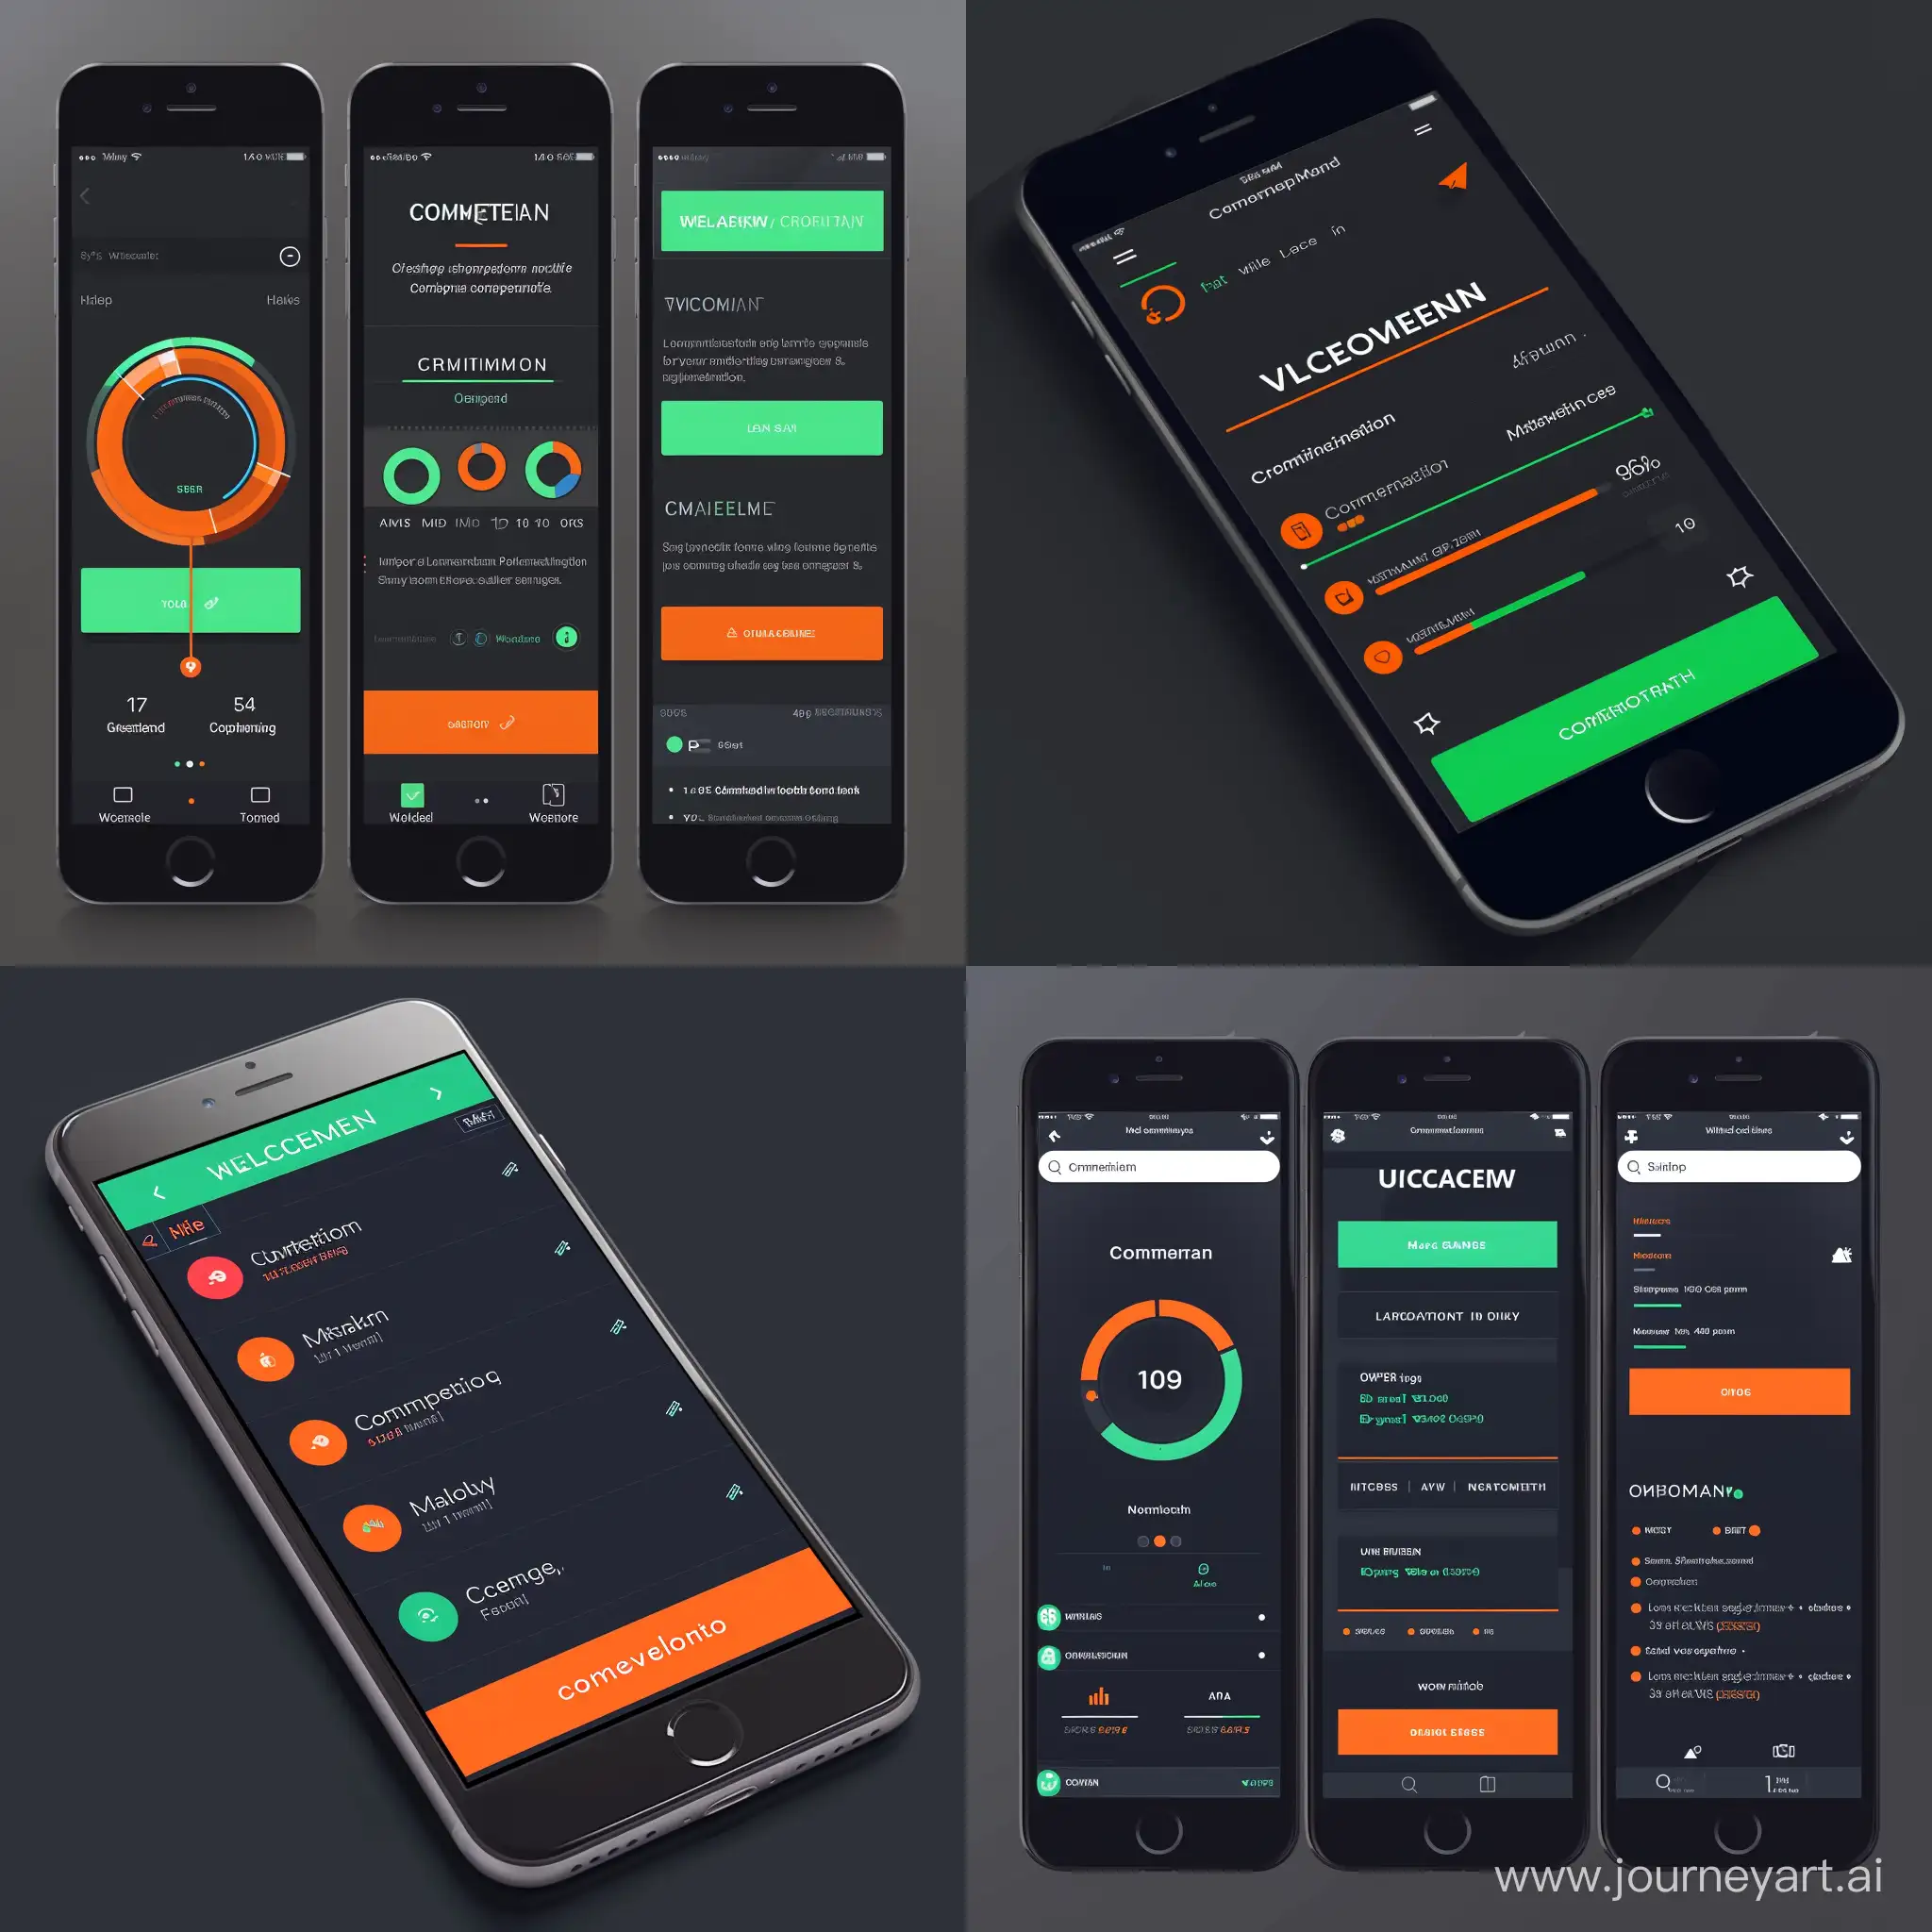 Simple tech inspired ios app
main color : dark
main accent : green
light accent : orange

Top - Welcome
Middle - Commitment
Bottom- Nav bar